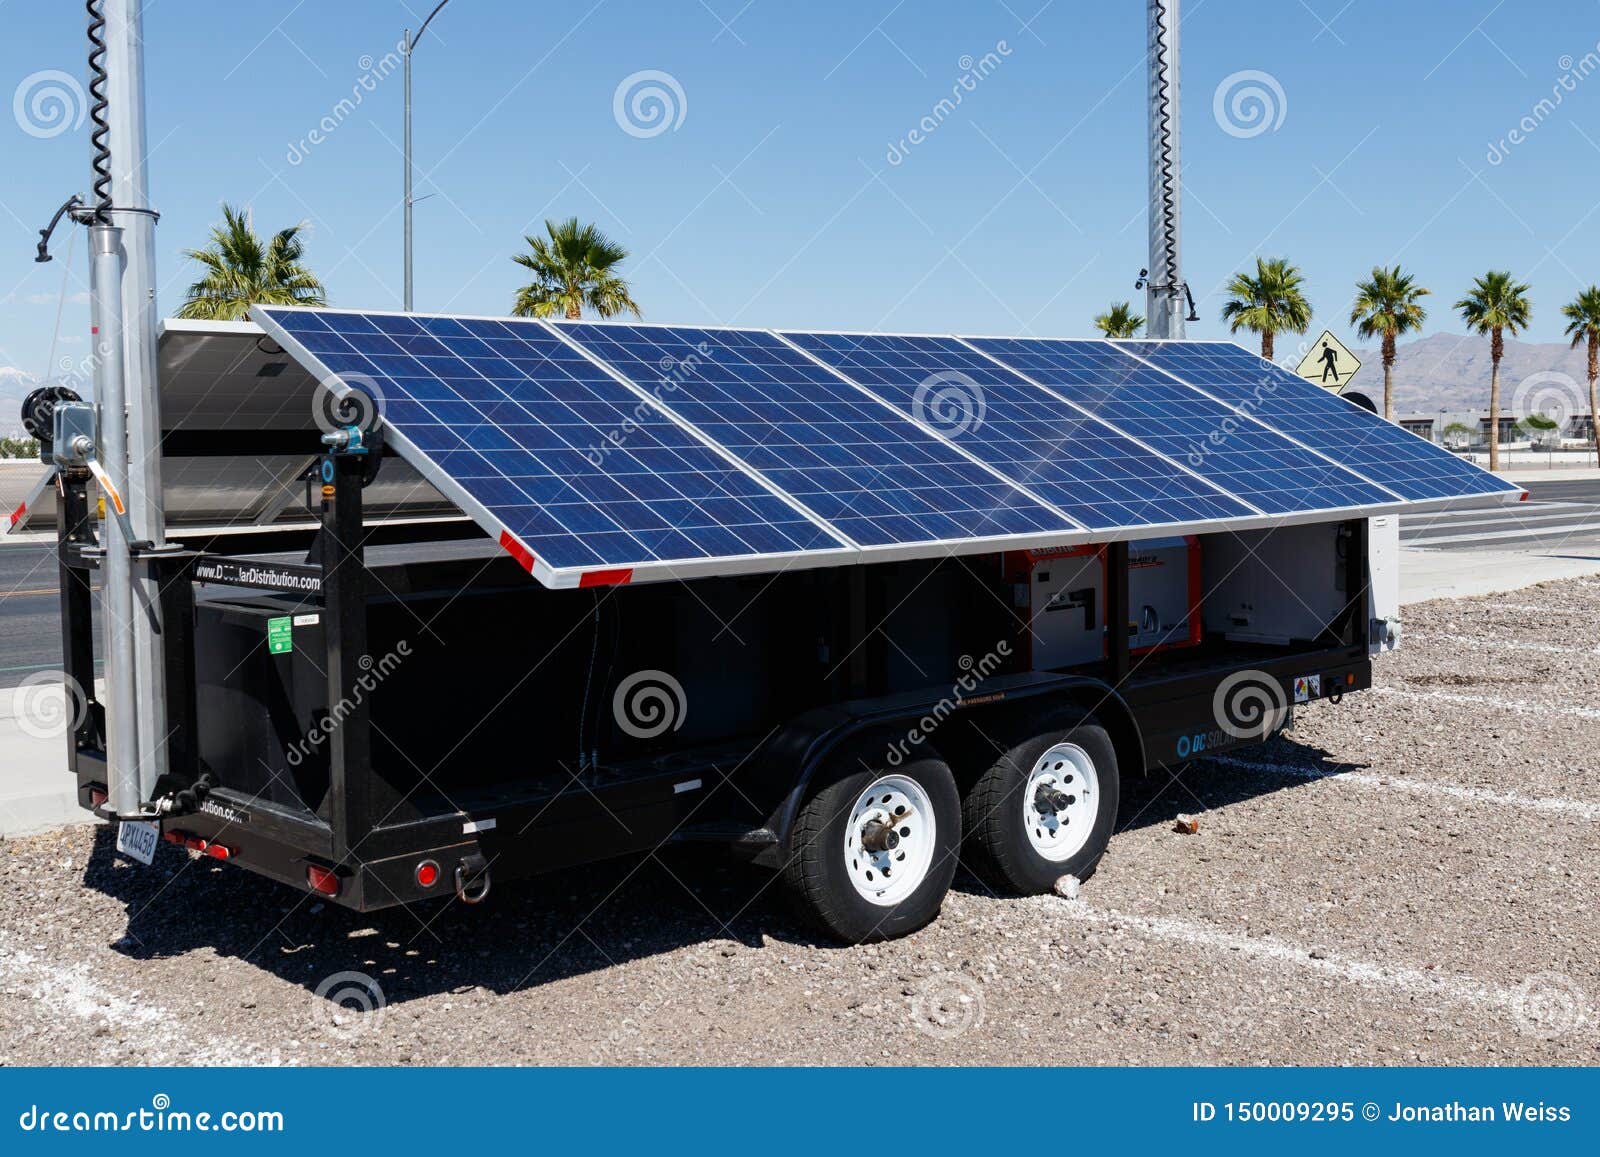 DC Solar Mobile Photovoltaic Solar Panels On Trailer. Each Unit Is Equipped With A Backup